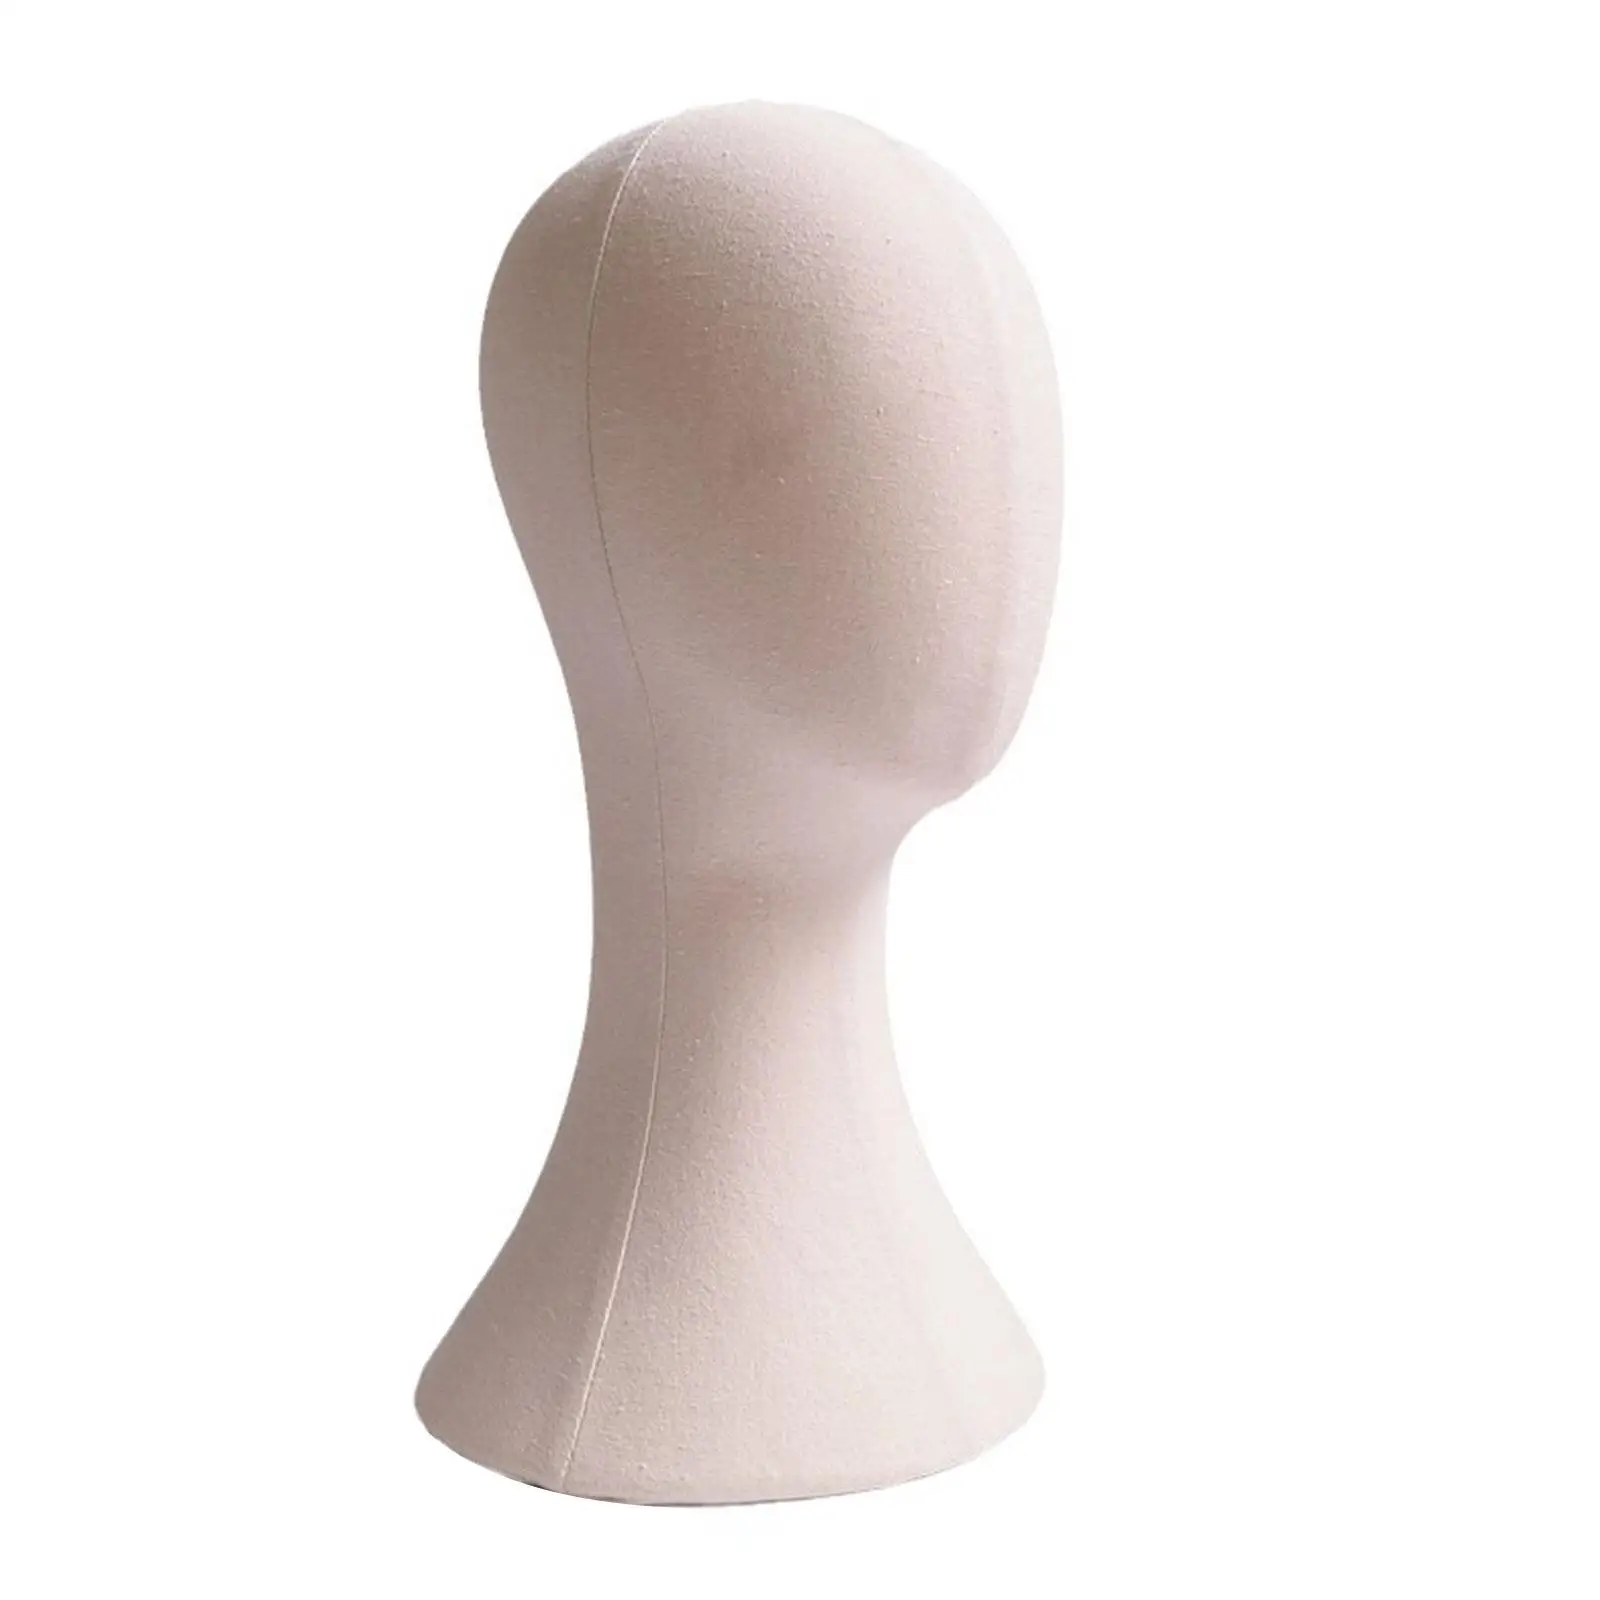 Mannequin Head Round Base Mannequin Manikin Head Height 15.55`` Hair Display Stand for Display Hat Headphone Glasses Cap Styling